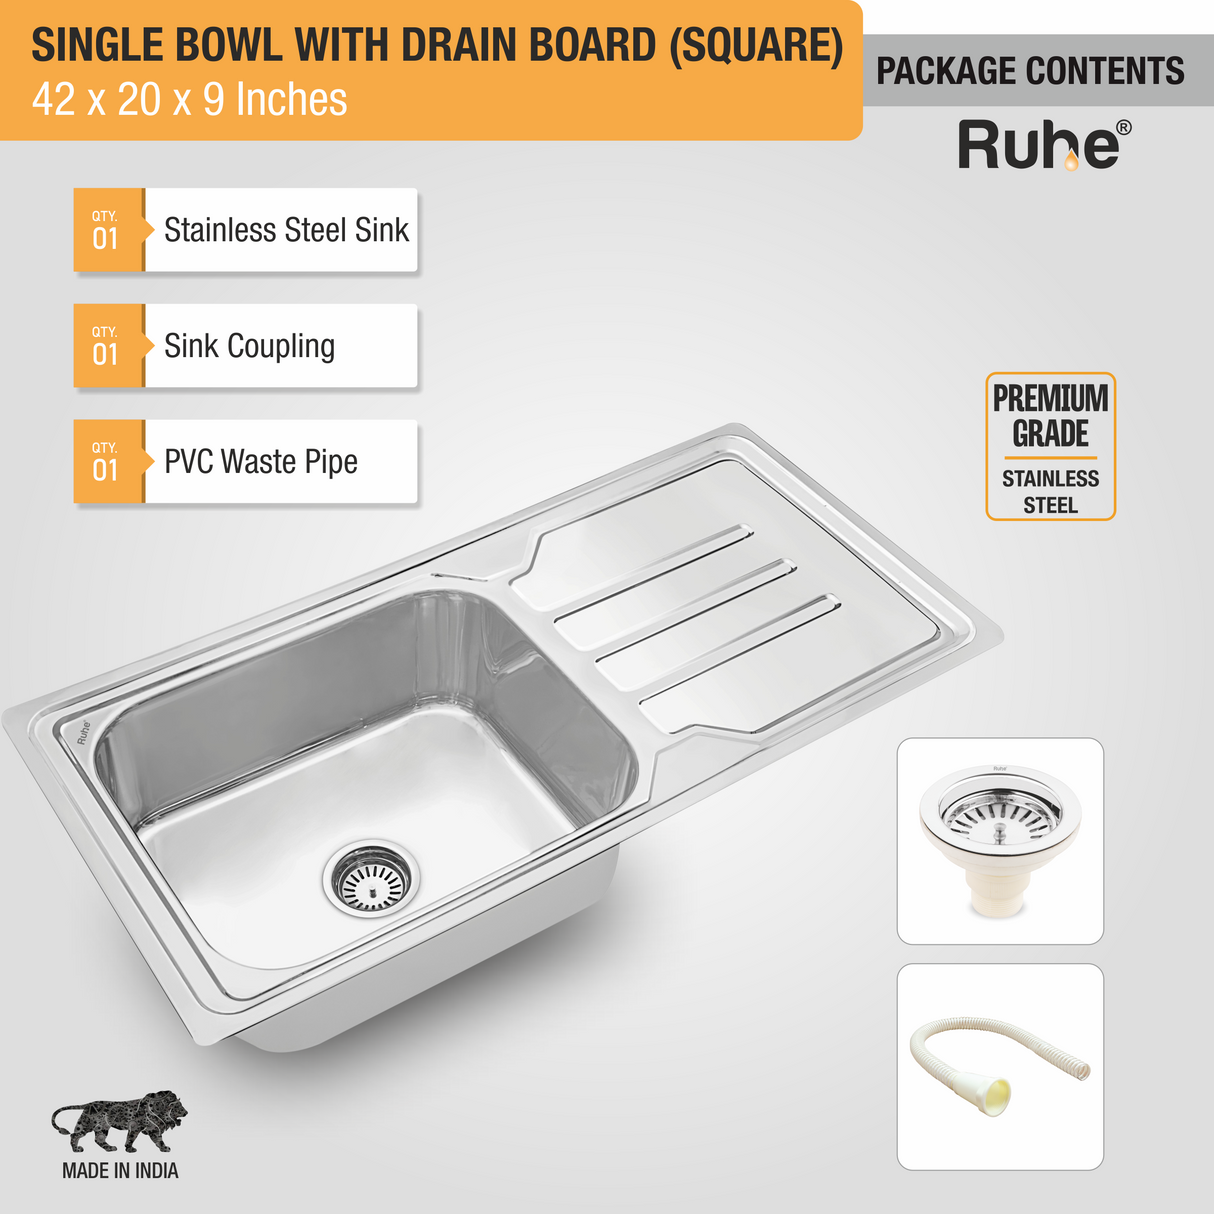 Square Single Bowl (42 x 20 x 9 Inches) Premium Stainless Steel Kitchen Sink with Drainboard package content